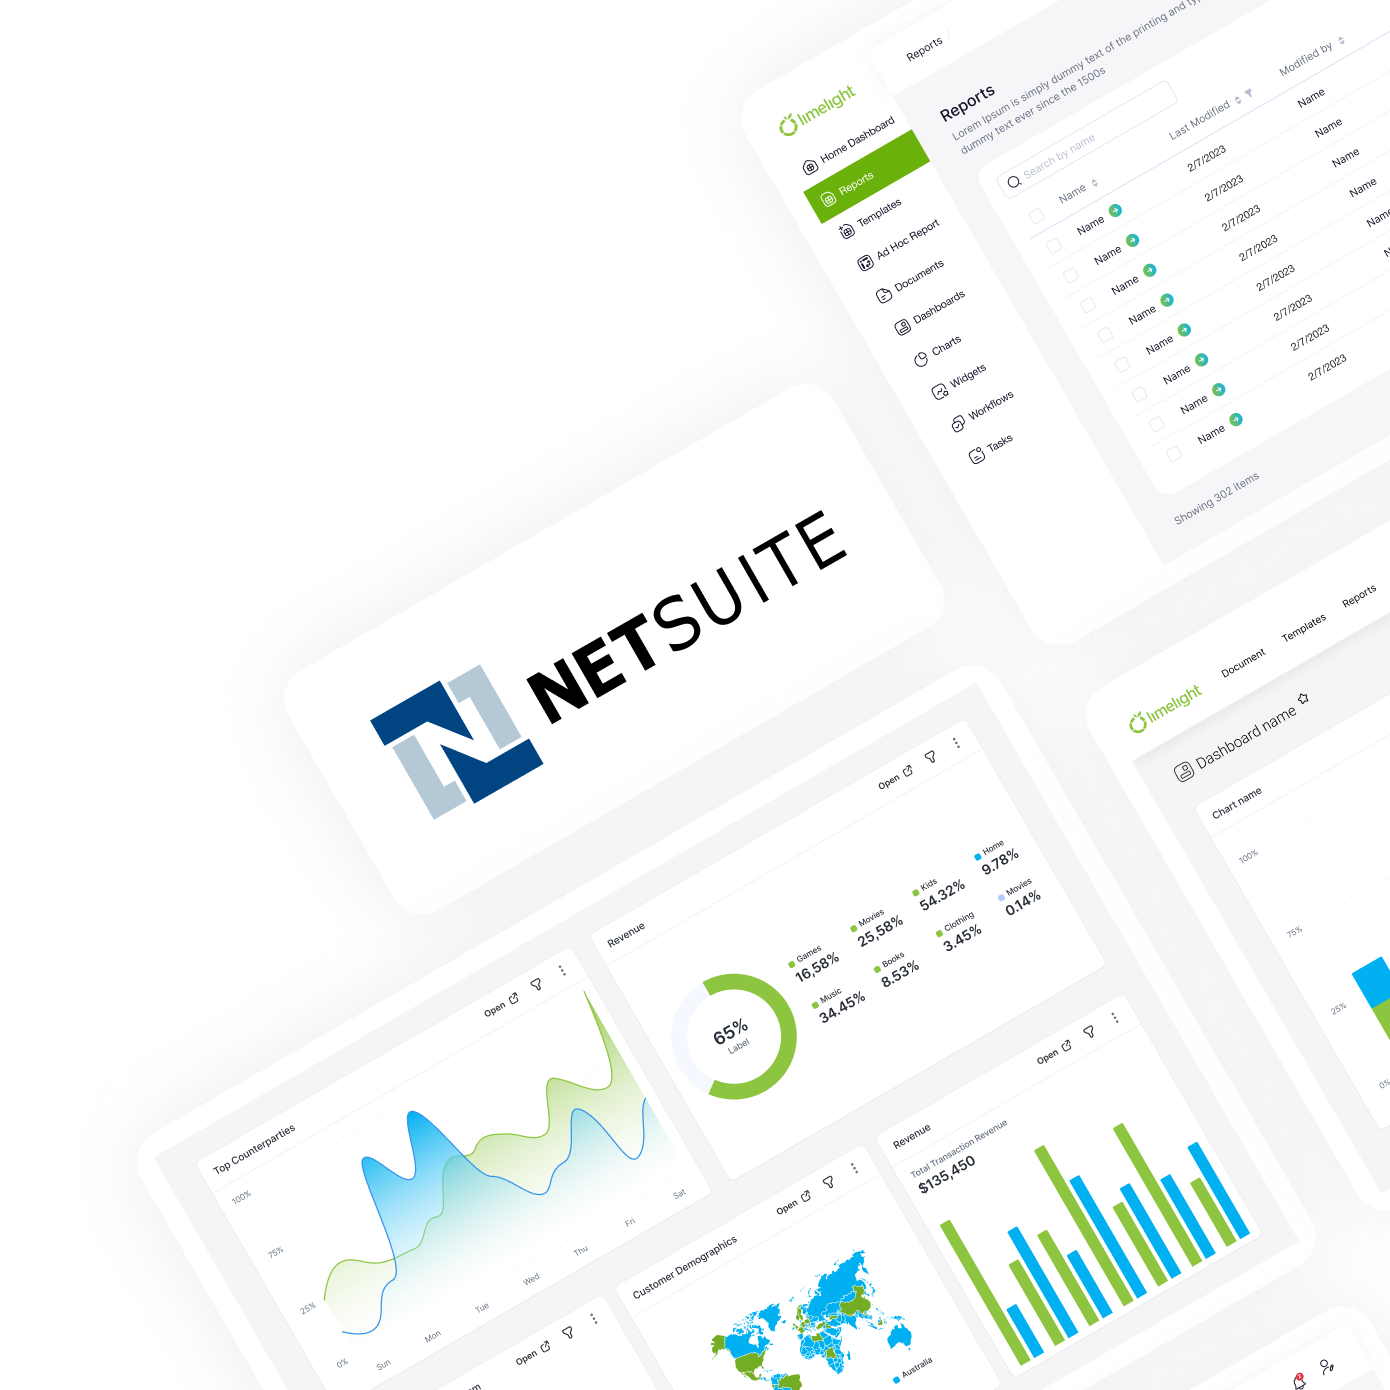 elevate your netsuite fp&a game with limelight